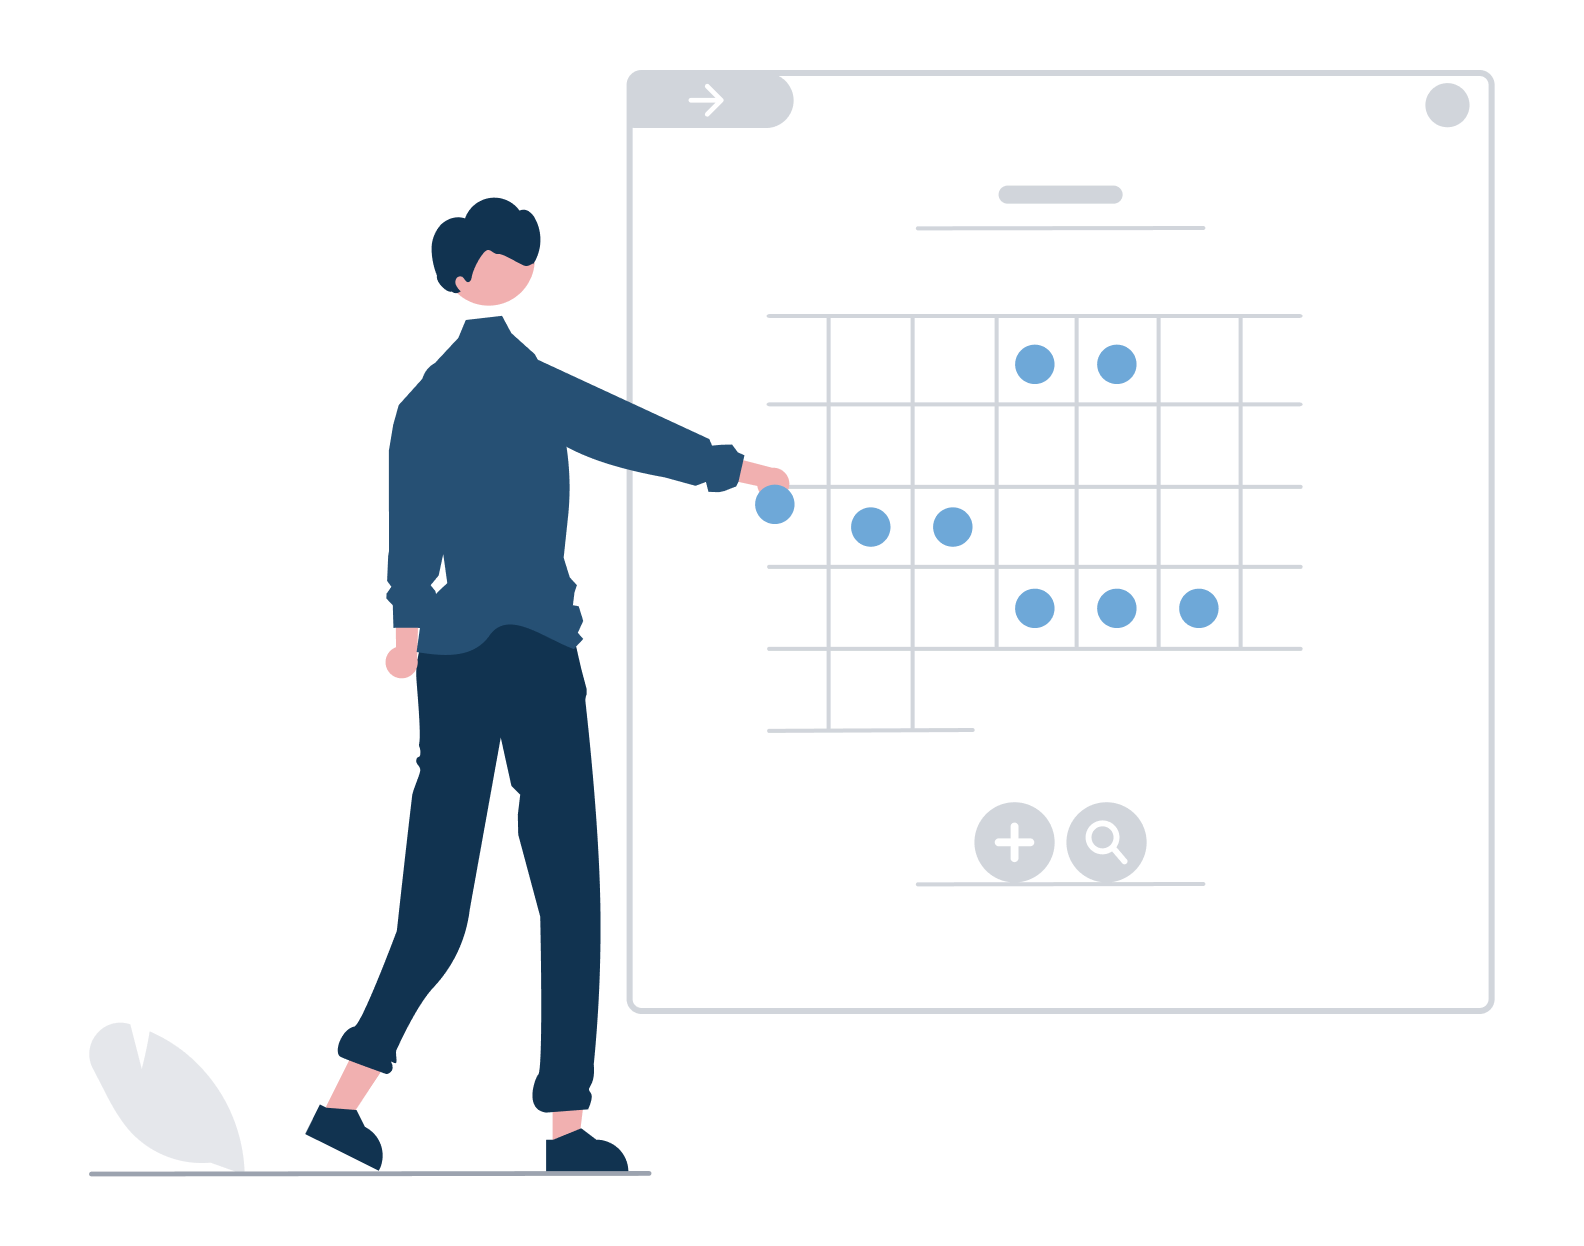 Illustration of a figure selecting a date in the past